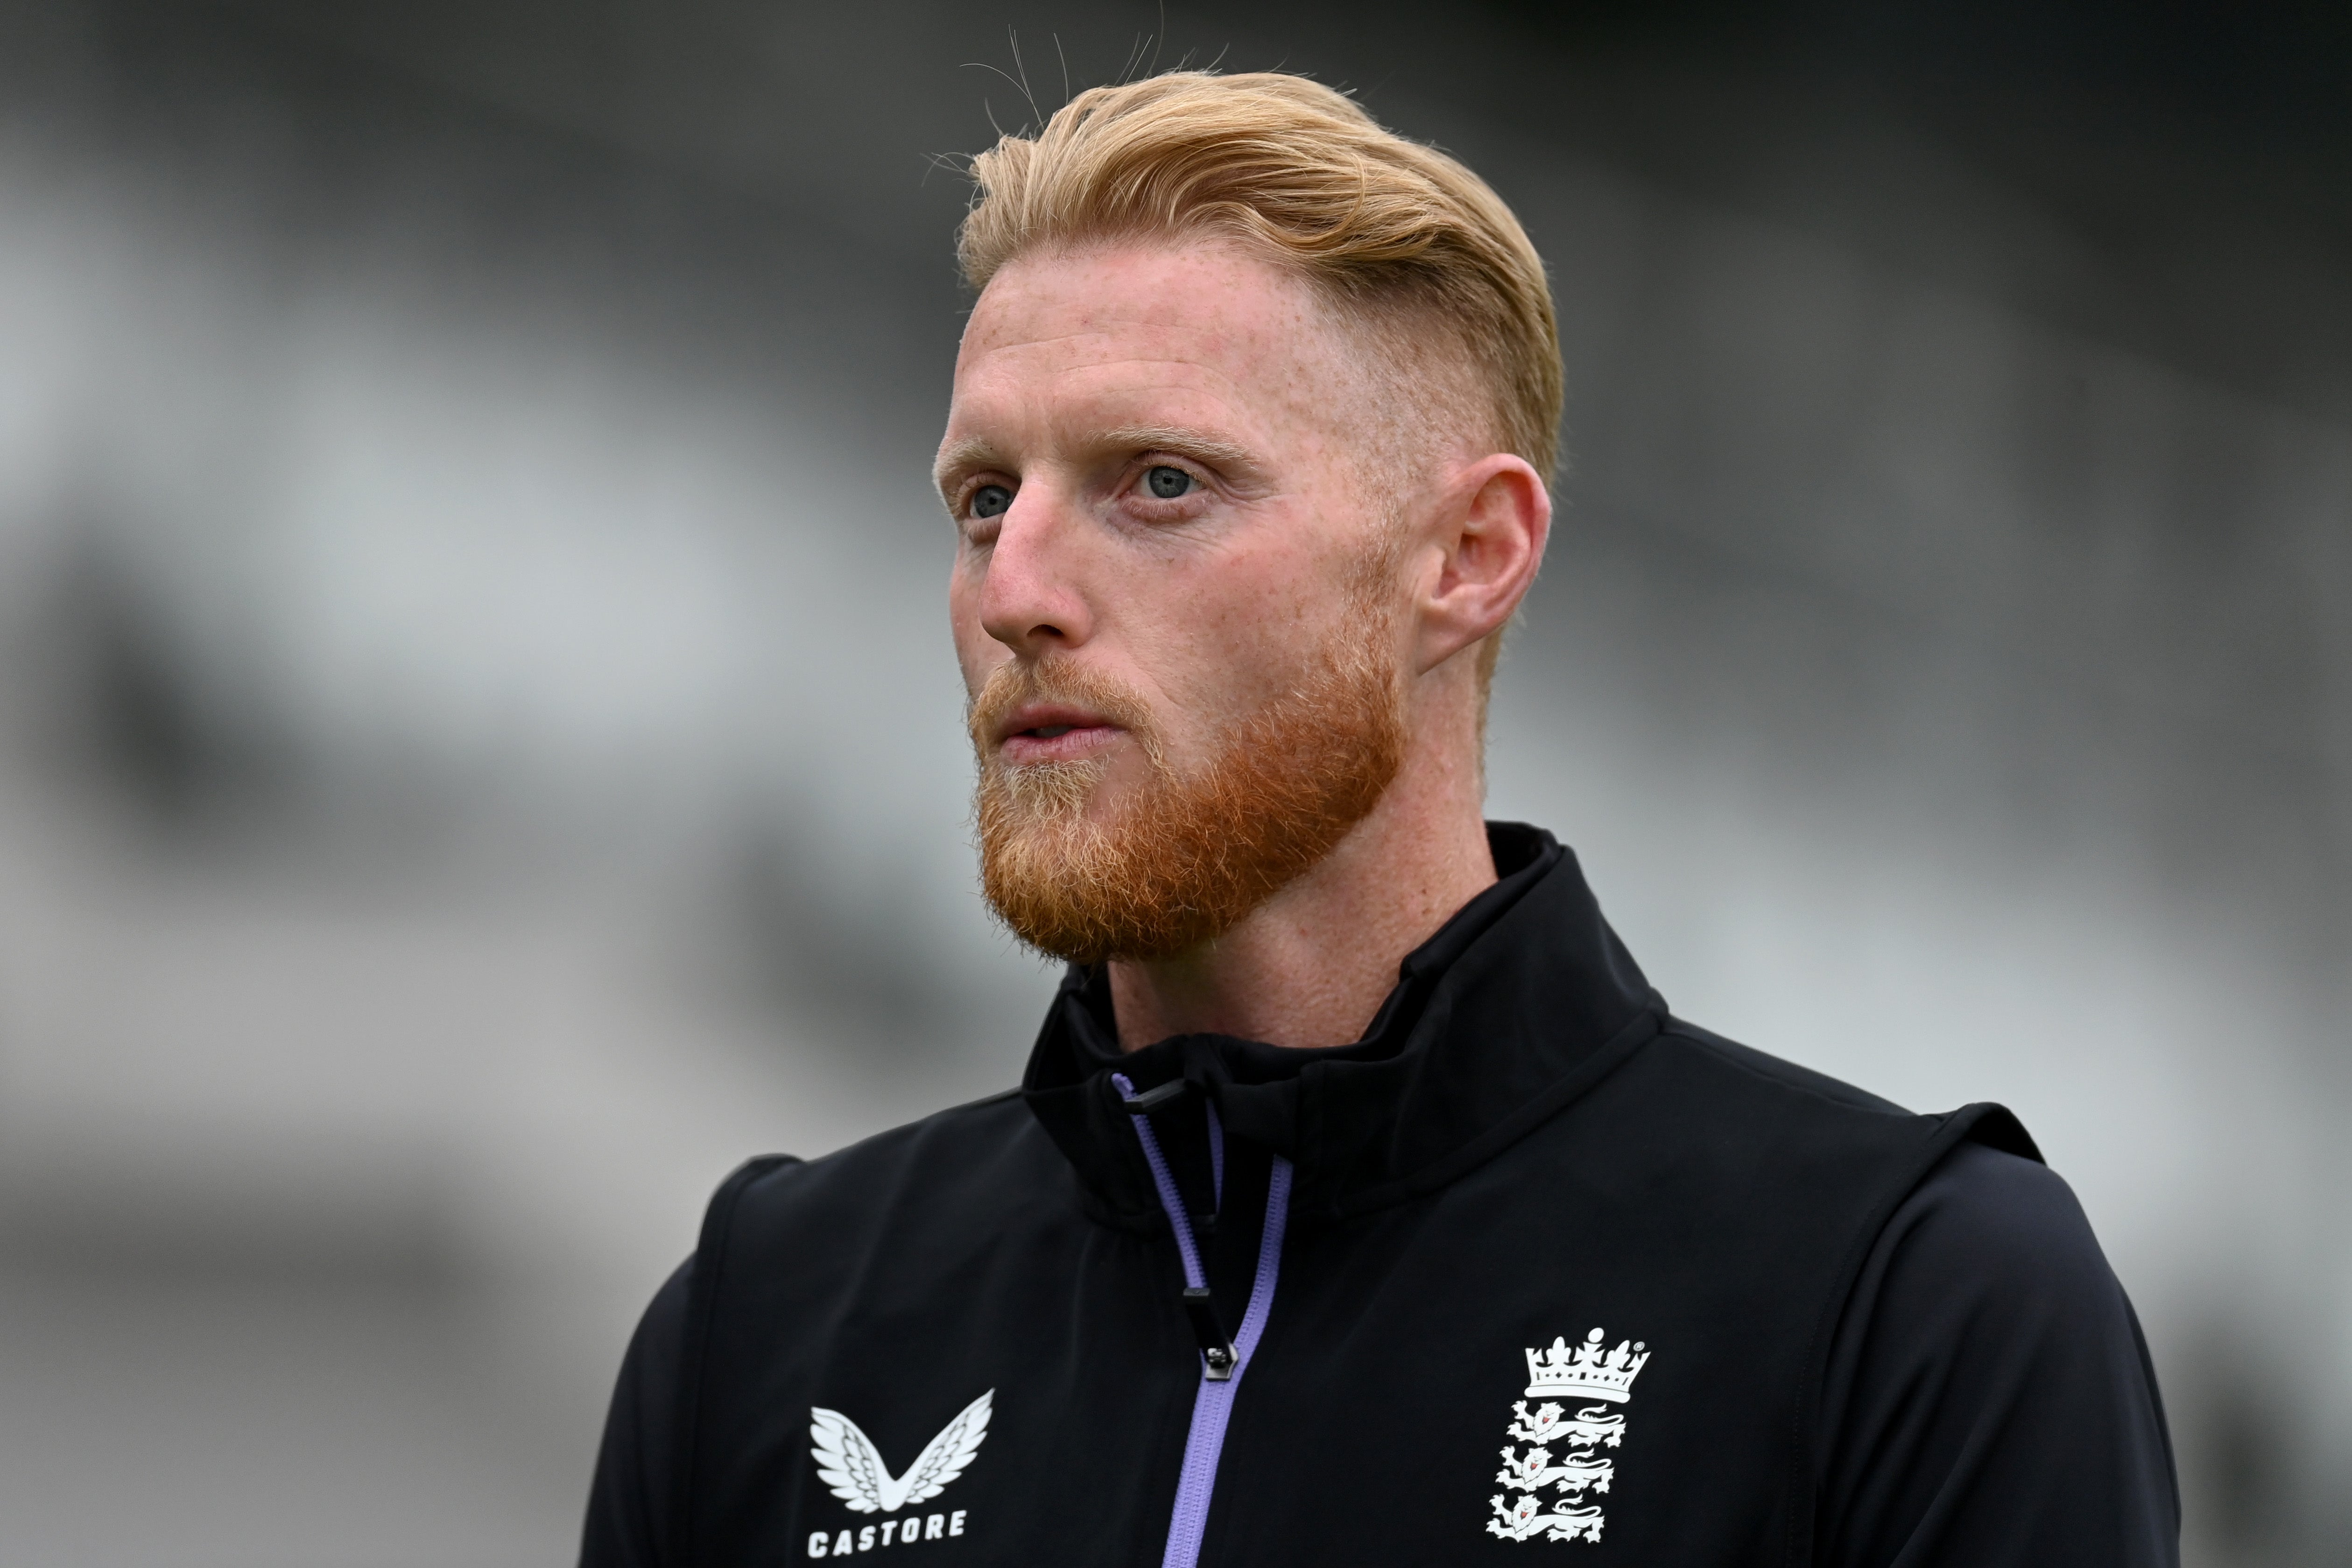 Ben Stokes admitted it was difficult to see the criticism of the English football team